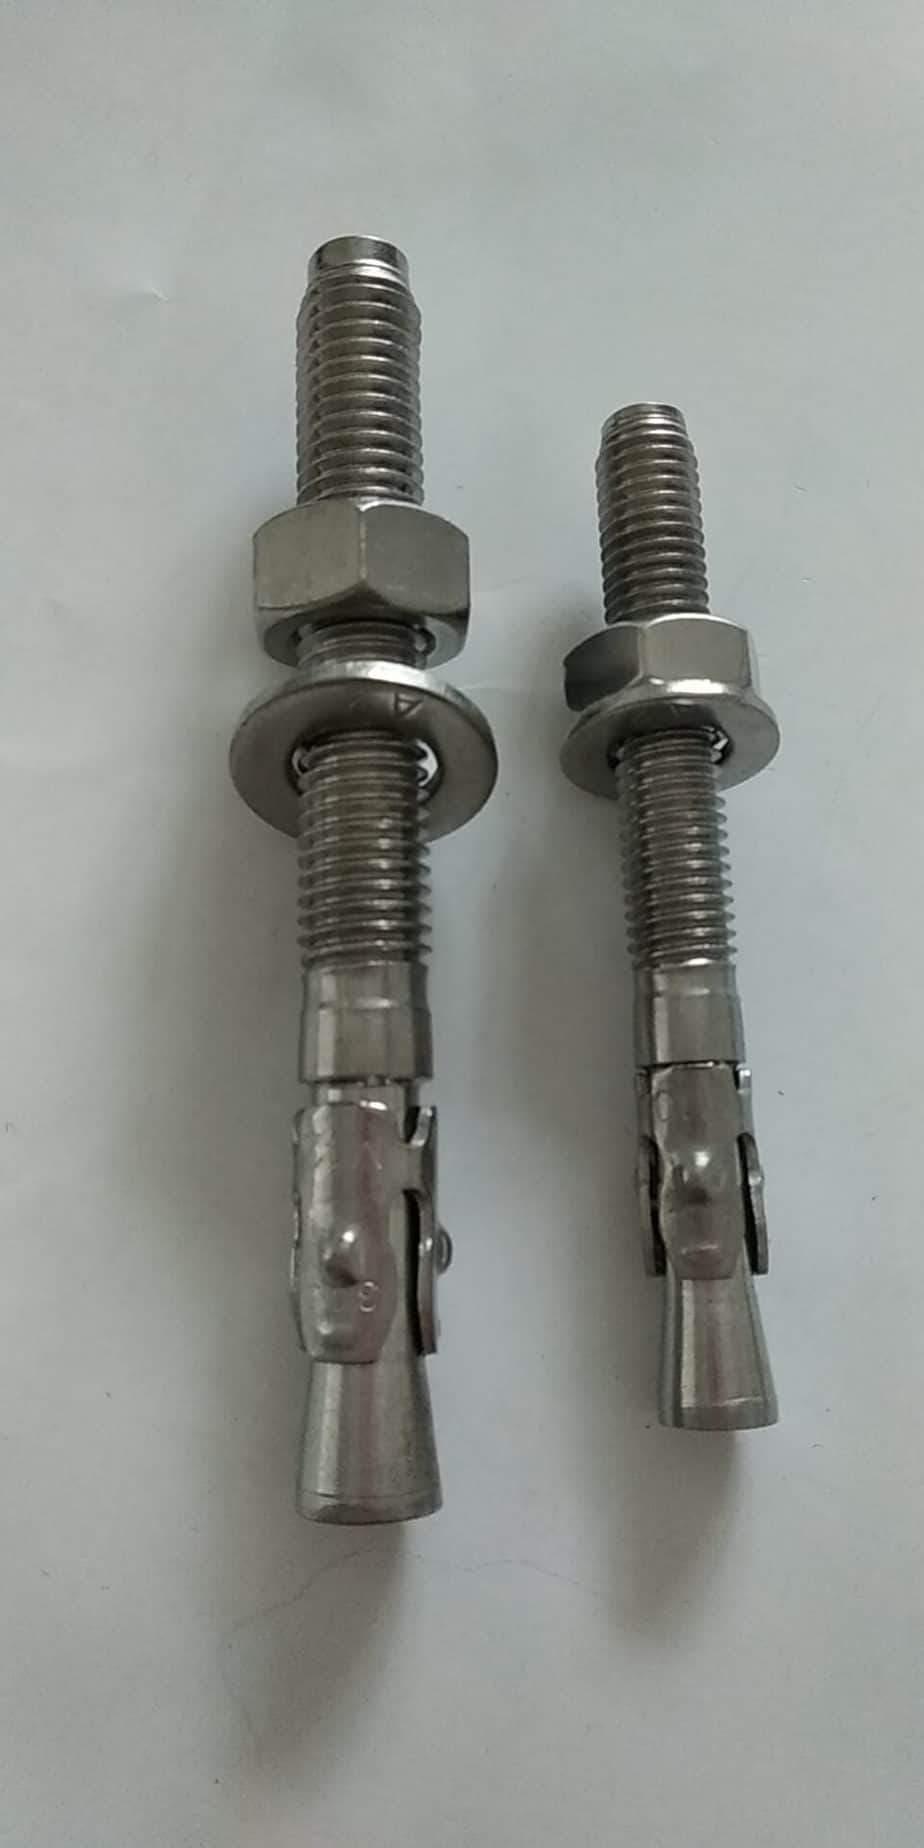 M10X110, M12 X100,Stainless Steel Anchor Bolts for Climbing Gym,Zipline Projects_RMC